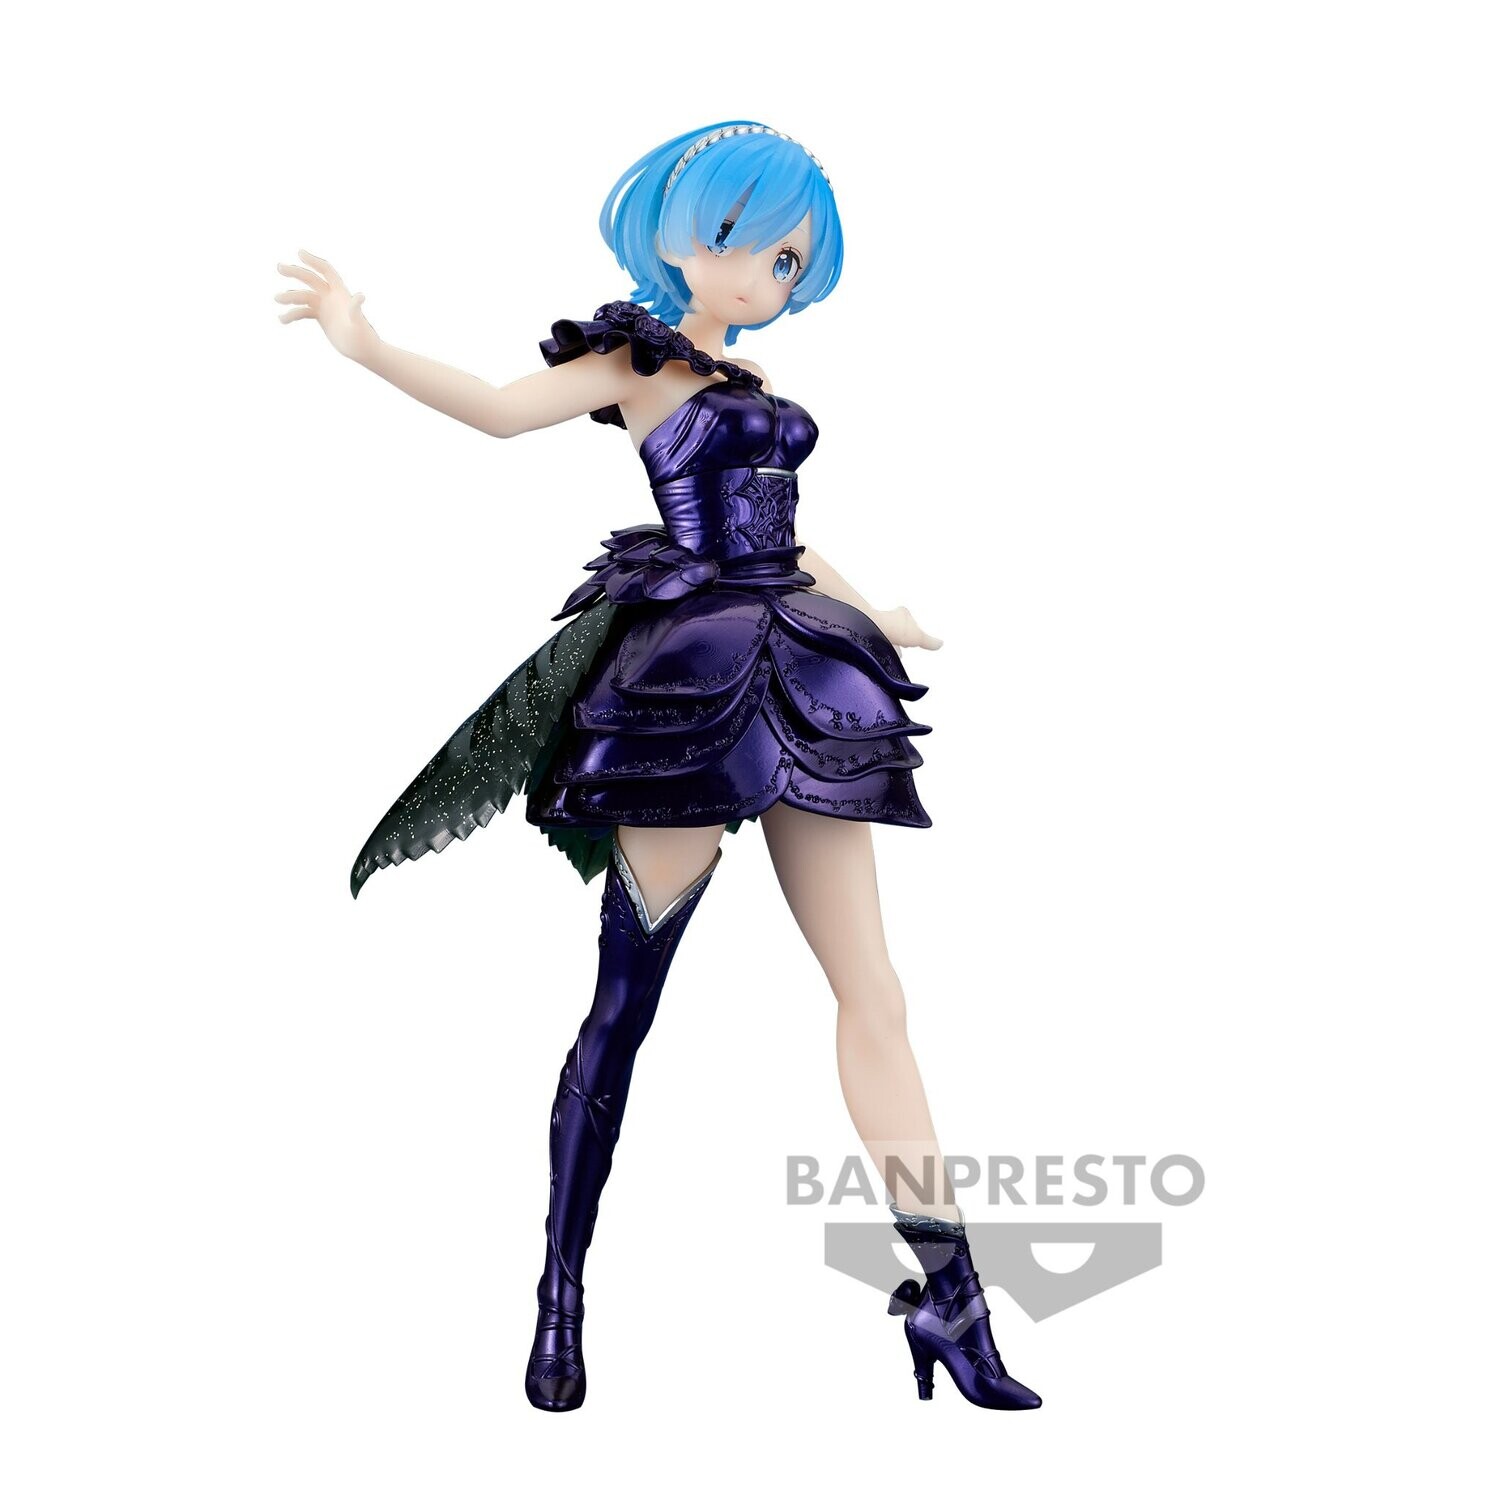 PRE-ORDER Banpresto Re: Zero Starting Life in Another World Dianacht Couture Rem